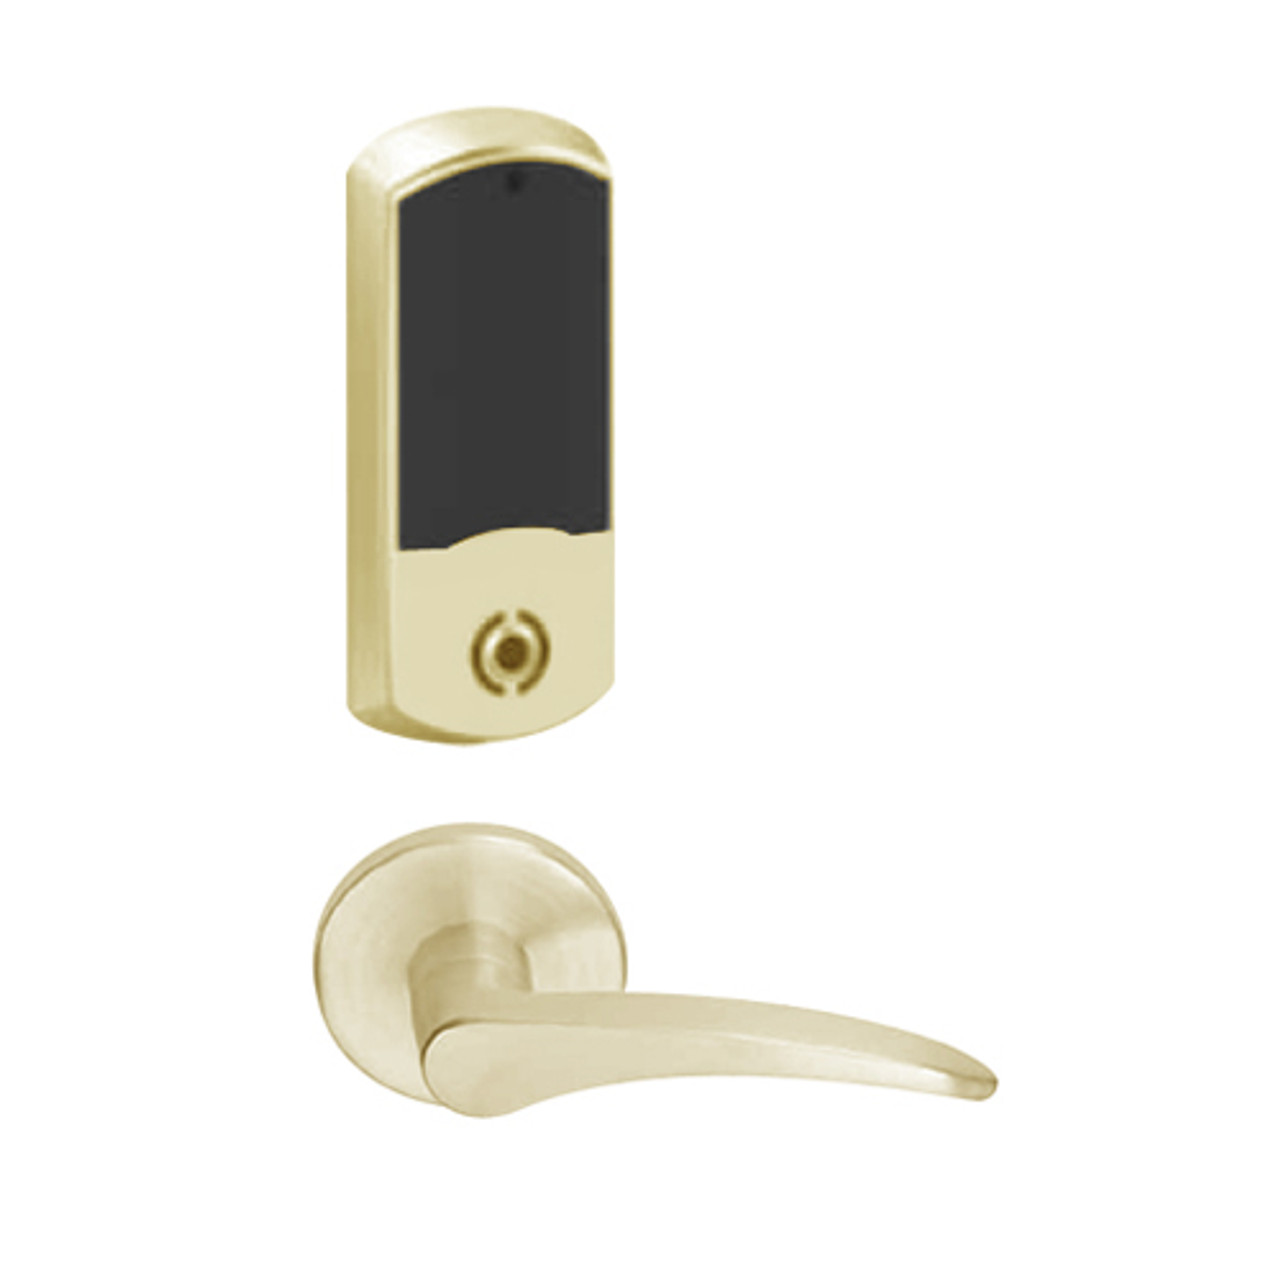 LEMS-GRW-J-12-606-00C-LH Schlage Storeroom Wireless Greenwich Mortise Lock with LED Indicator and 12 Lever Prepped for FSIC in Satin Brass